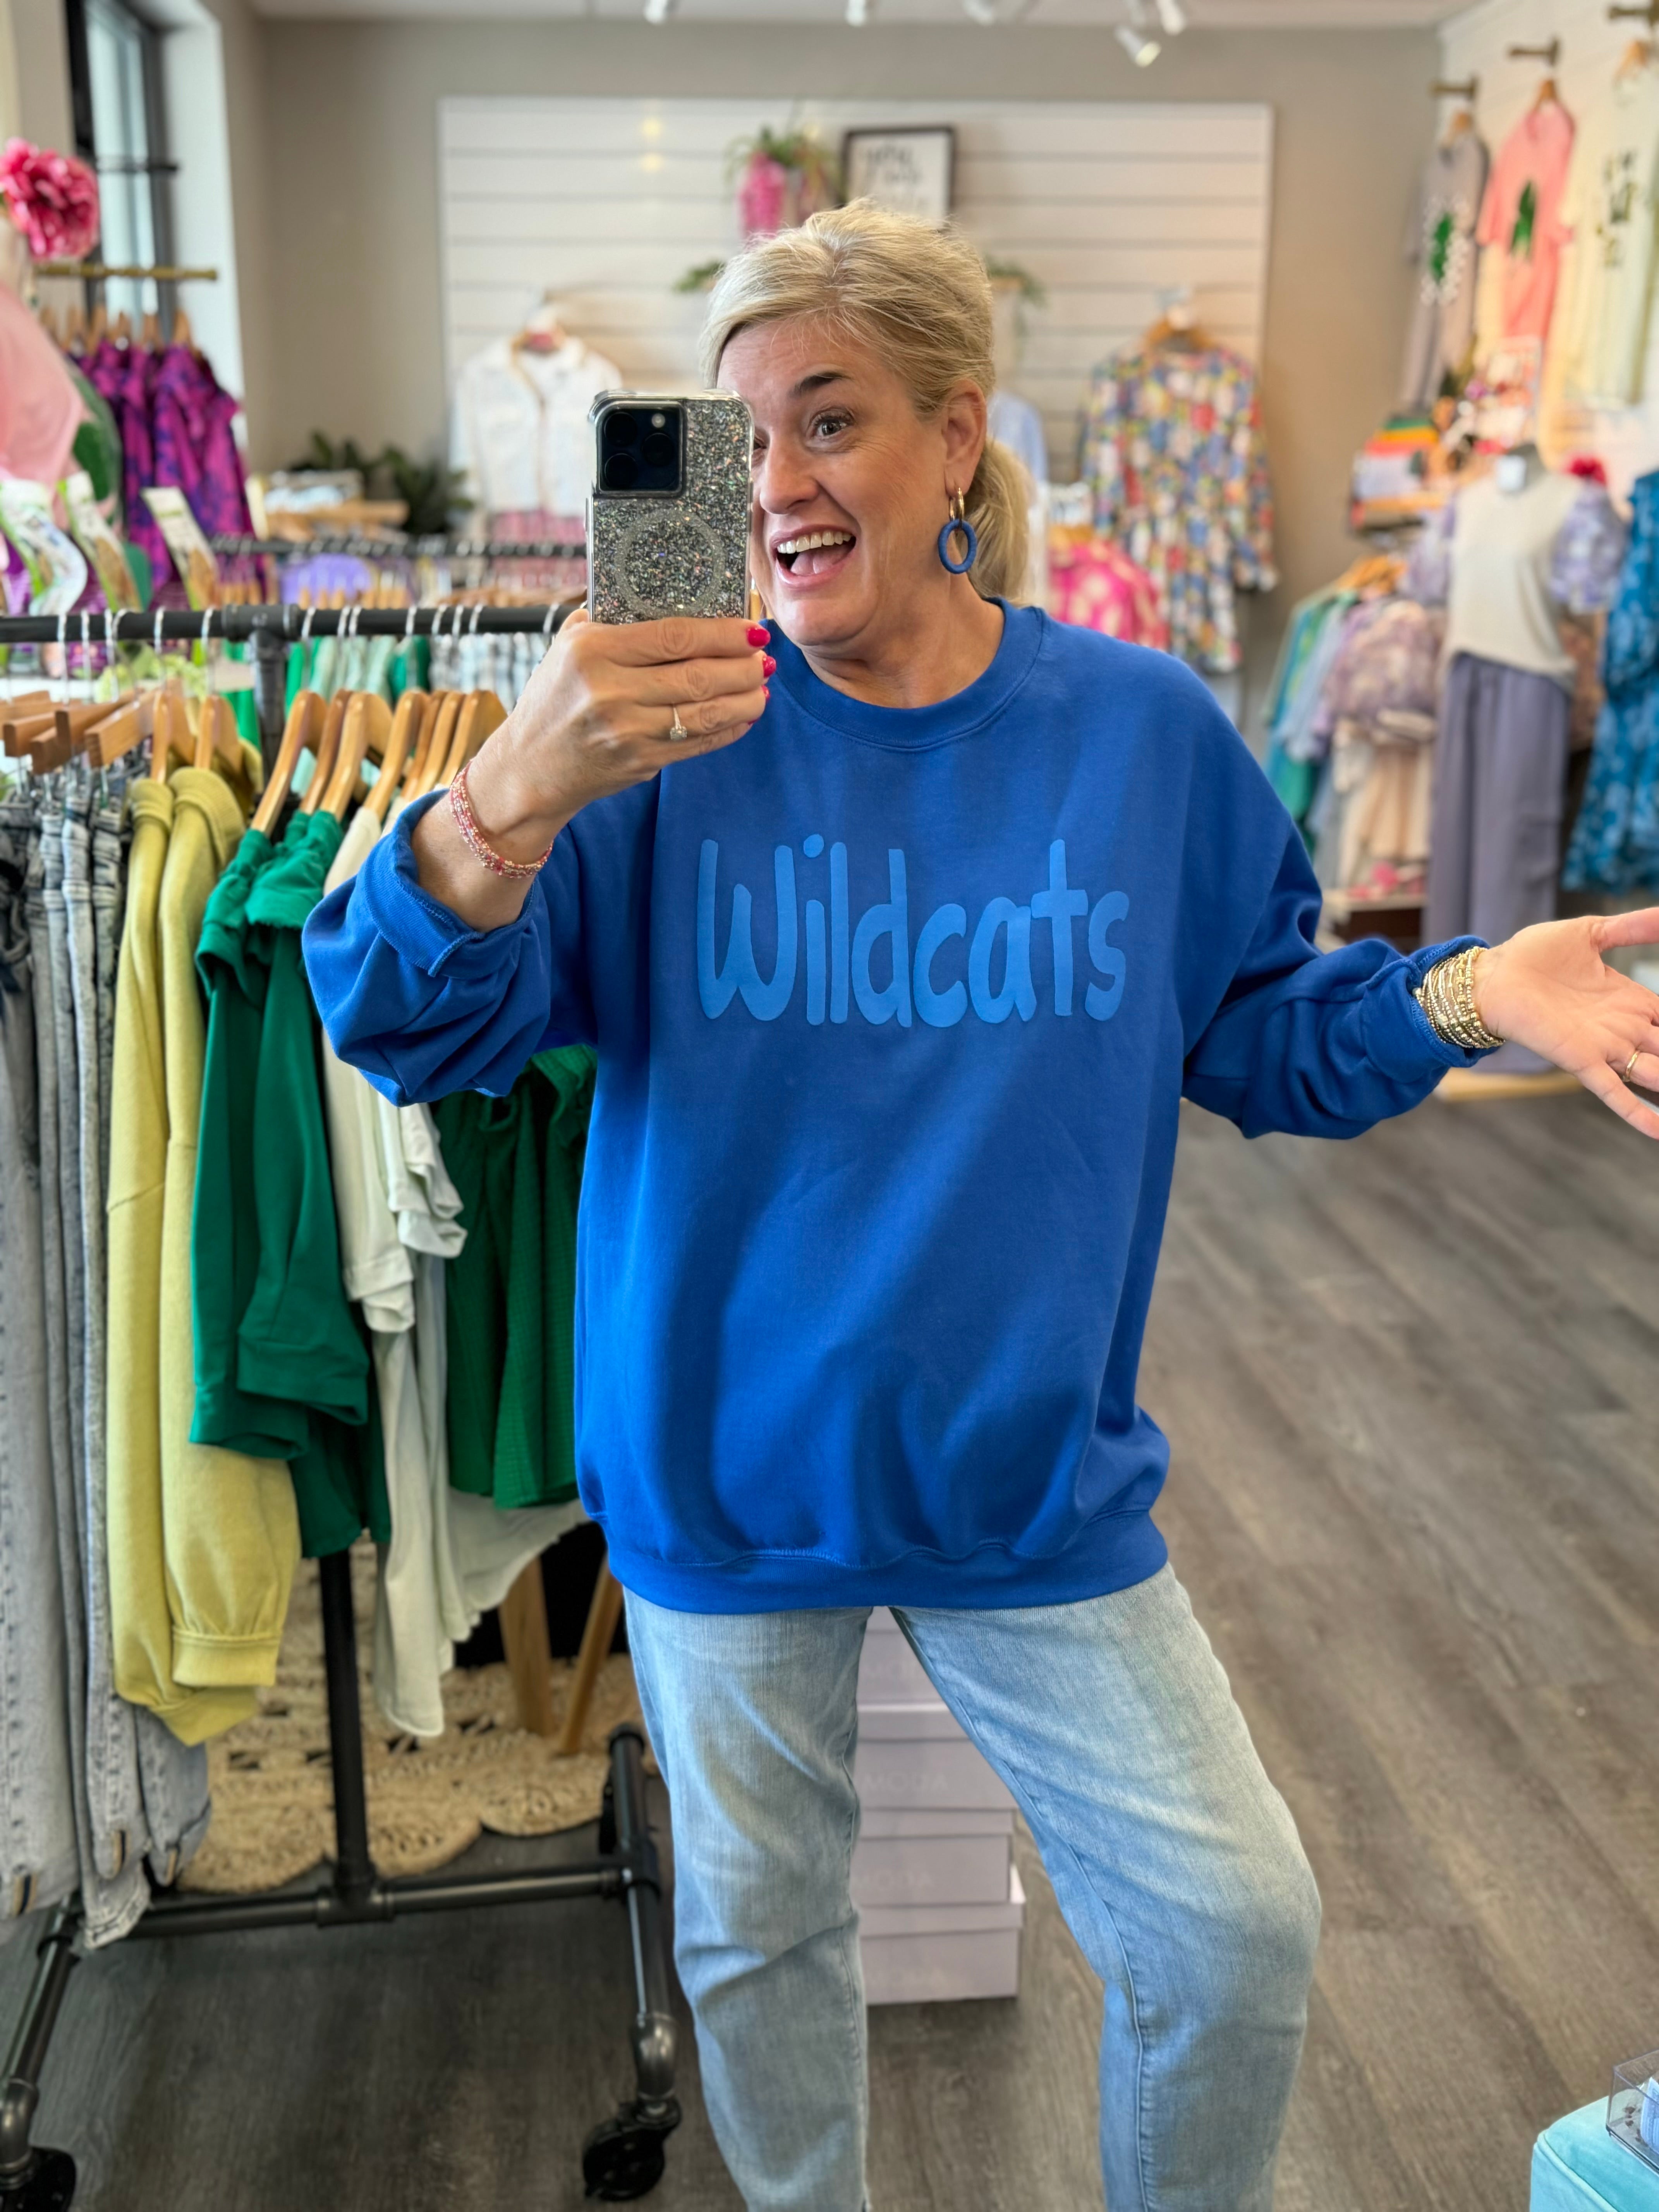 Deal of the Day Wildcats Crewneck-150 Sweatshirts-The Lovely Closet-The Lovely Closet, Women's Fashion Boutique in Alexandria, KY